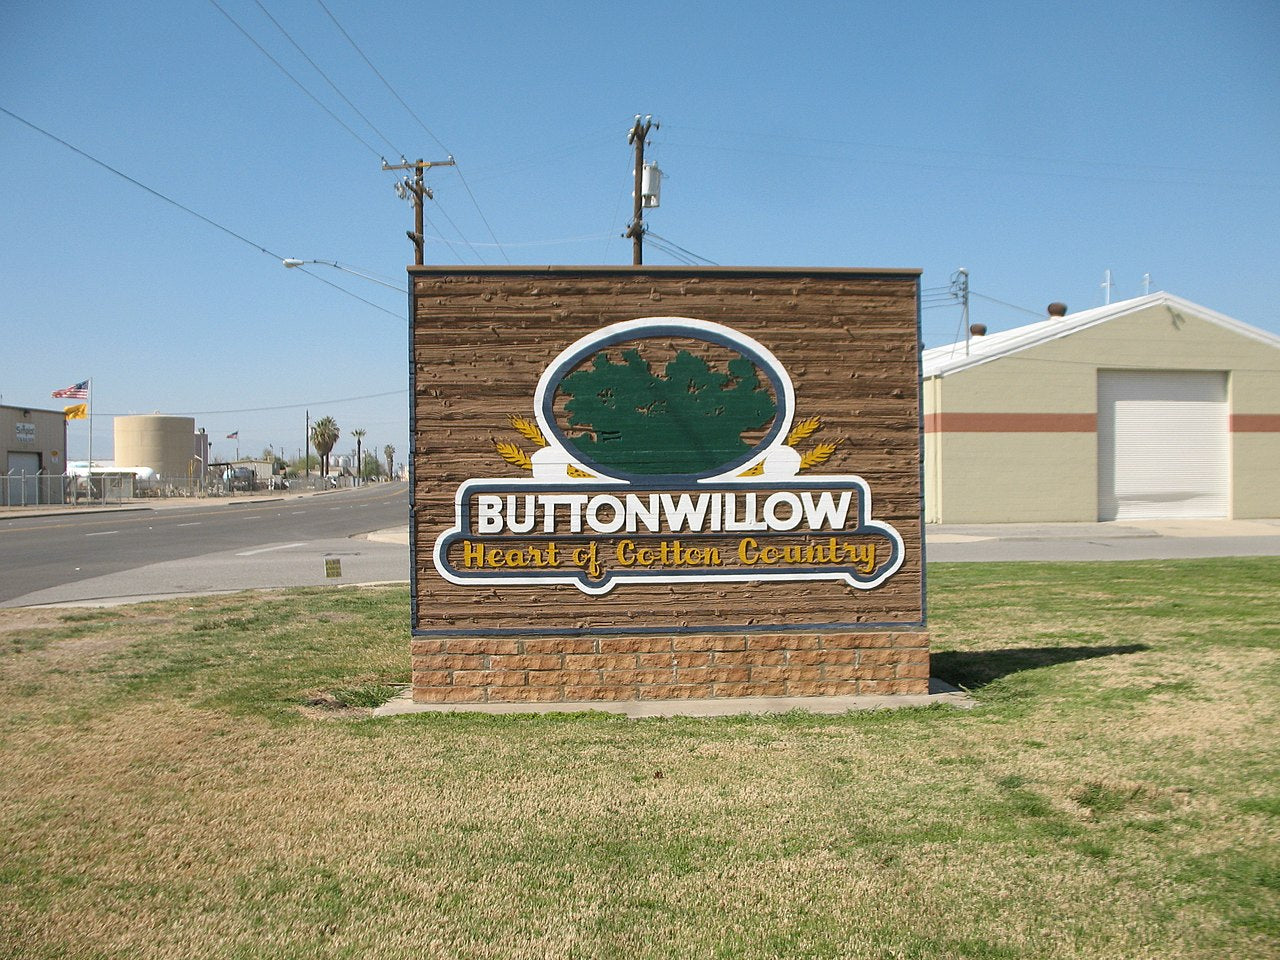 Haus and Hues in Buttonwillow